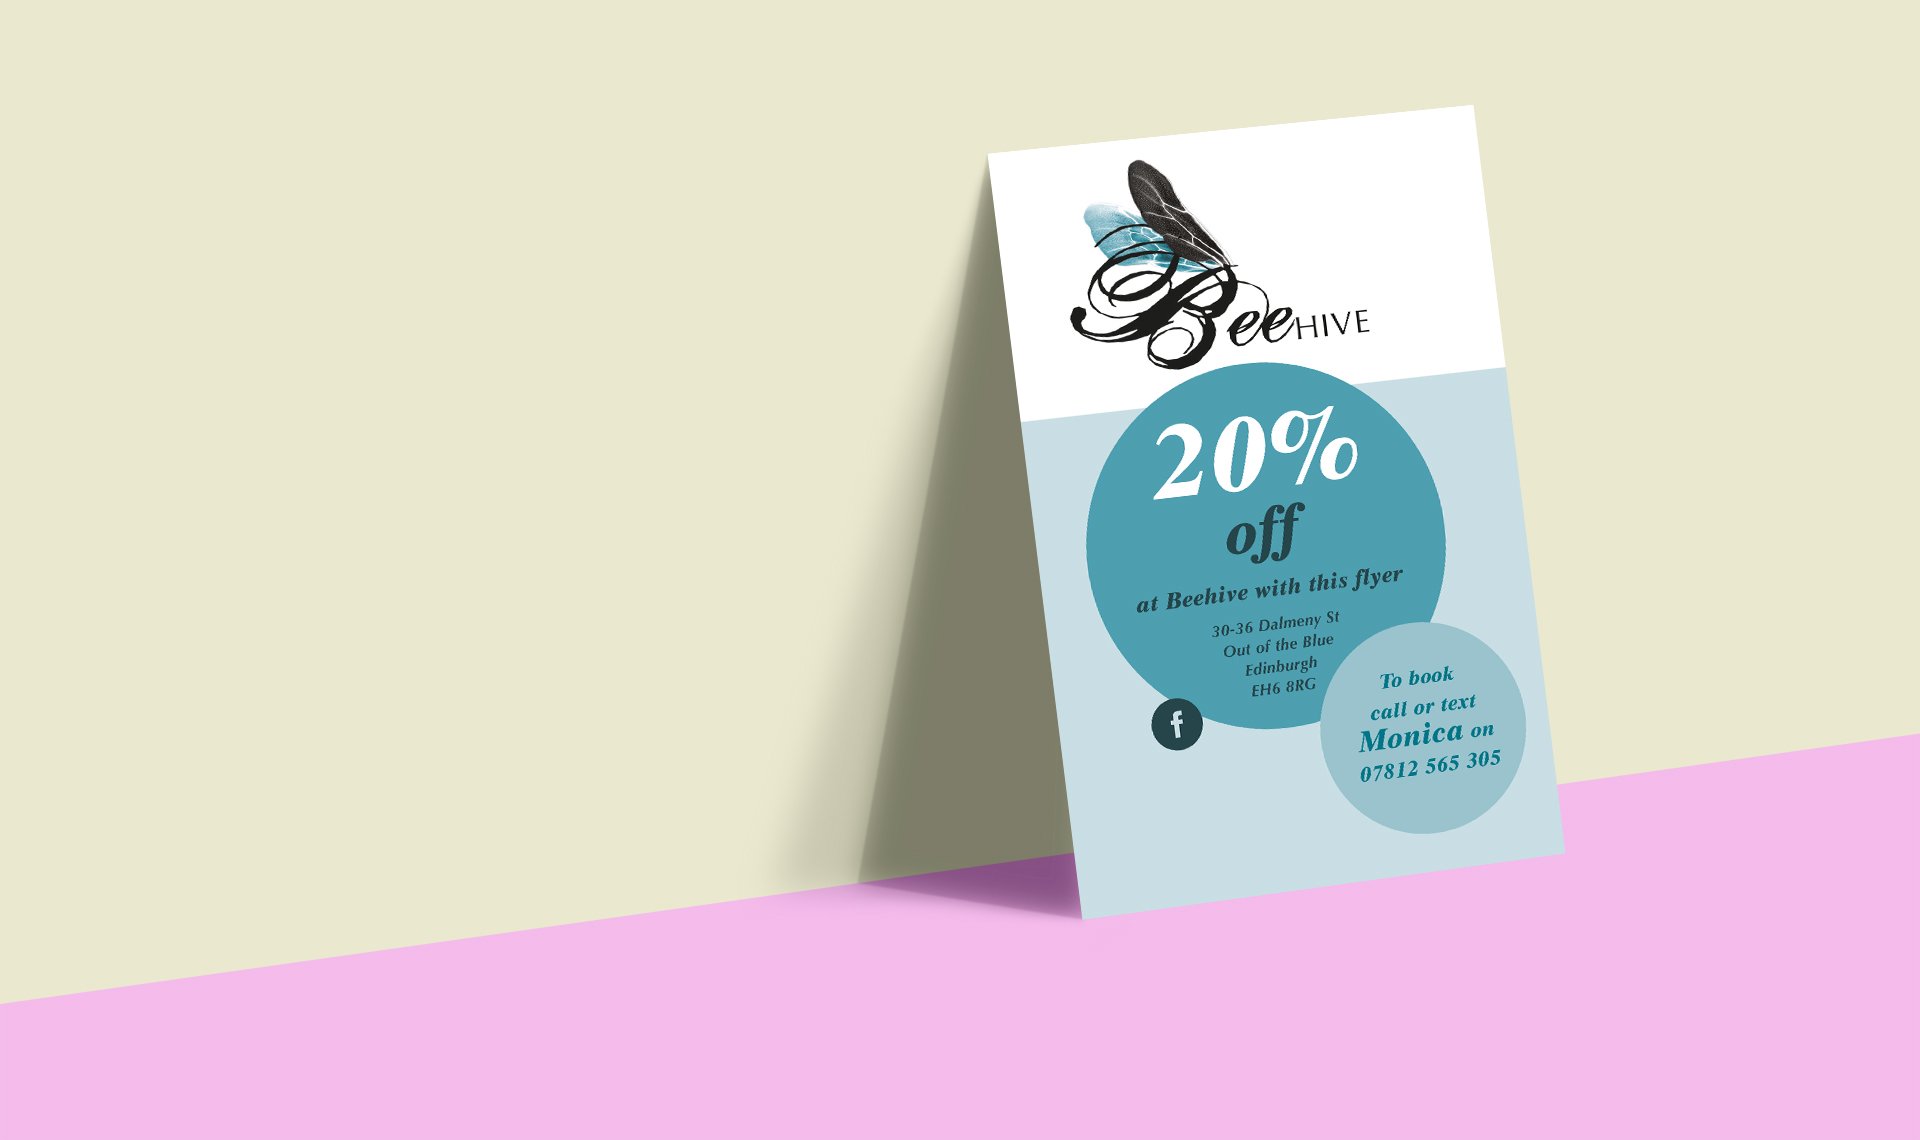 Beehive salon's designed leaflets for 20% off a cut, colour or style